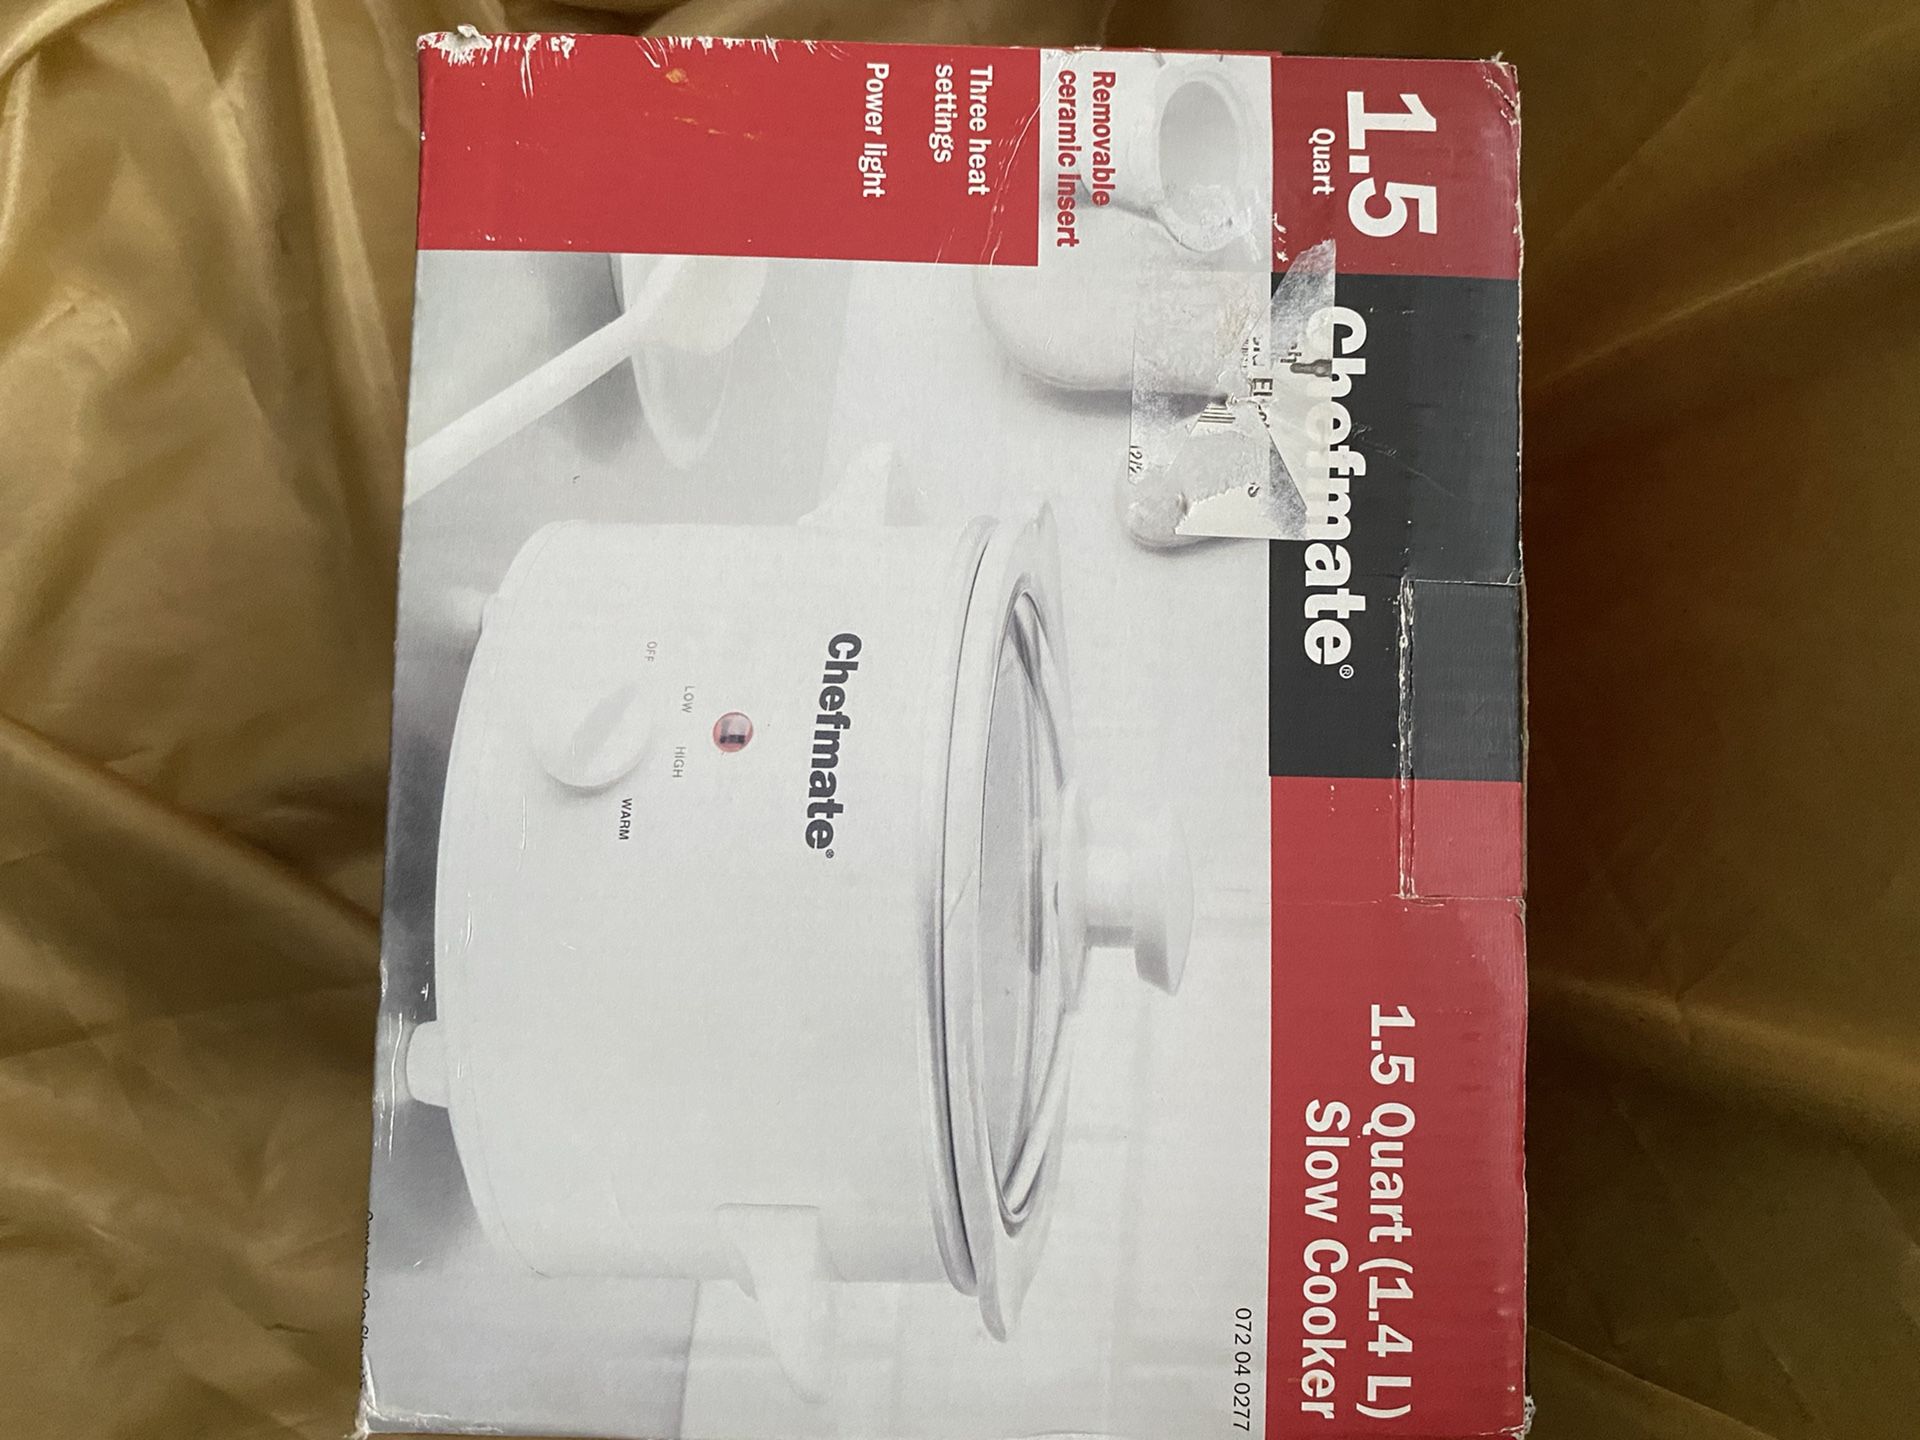 Slow Cooker 1.5 Q BRAND NEW IN BOX